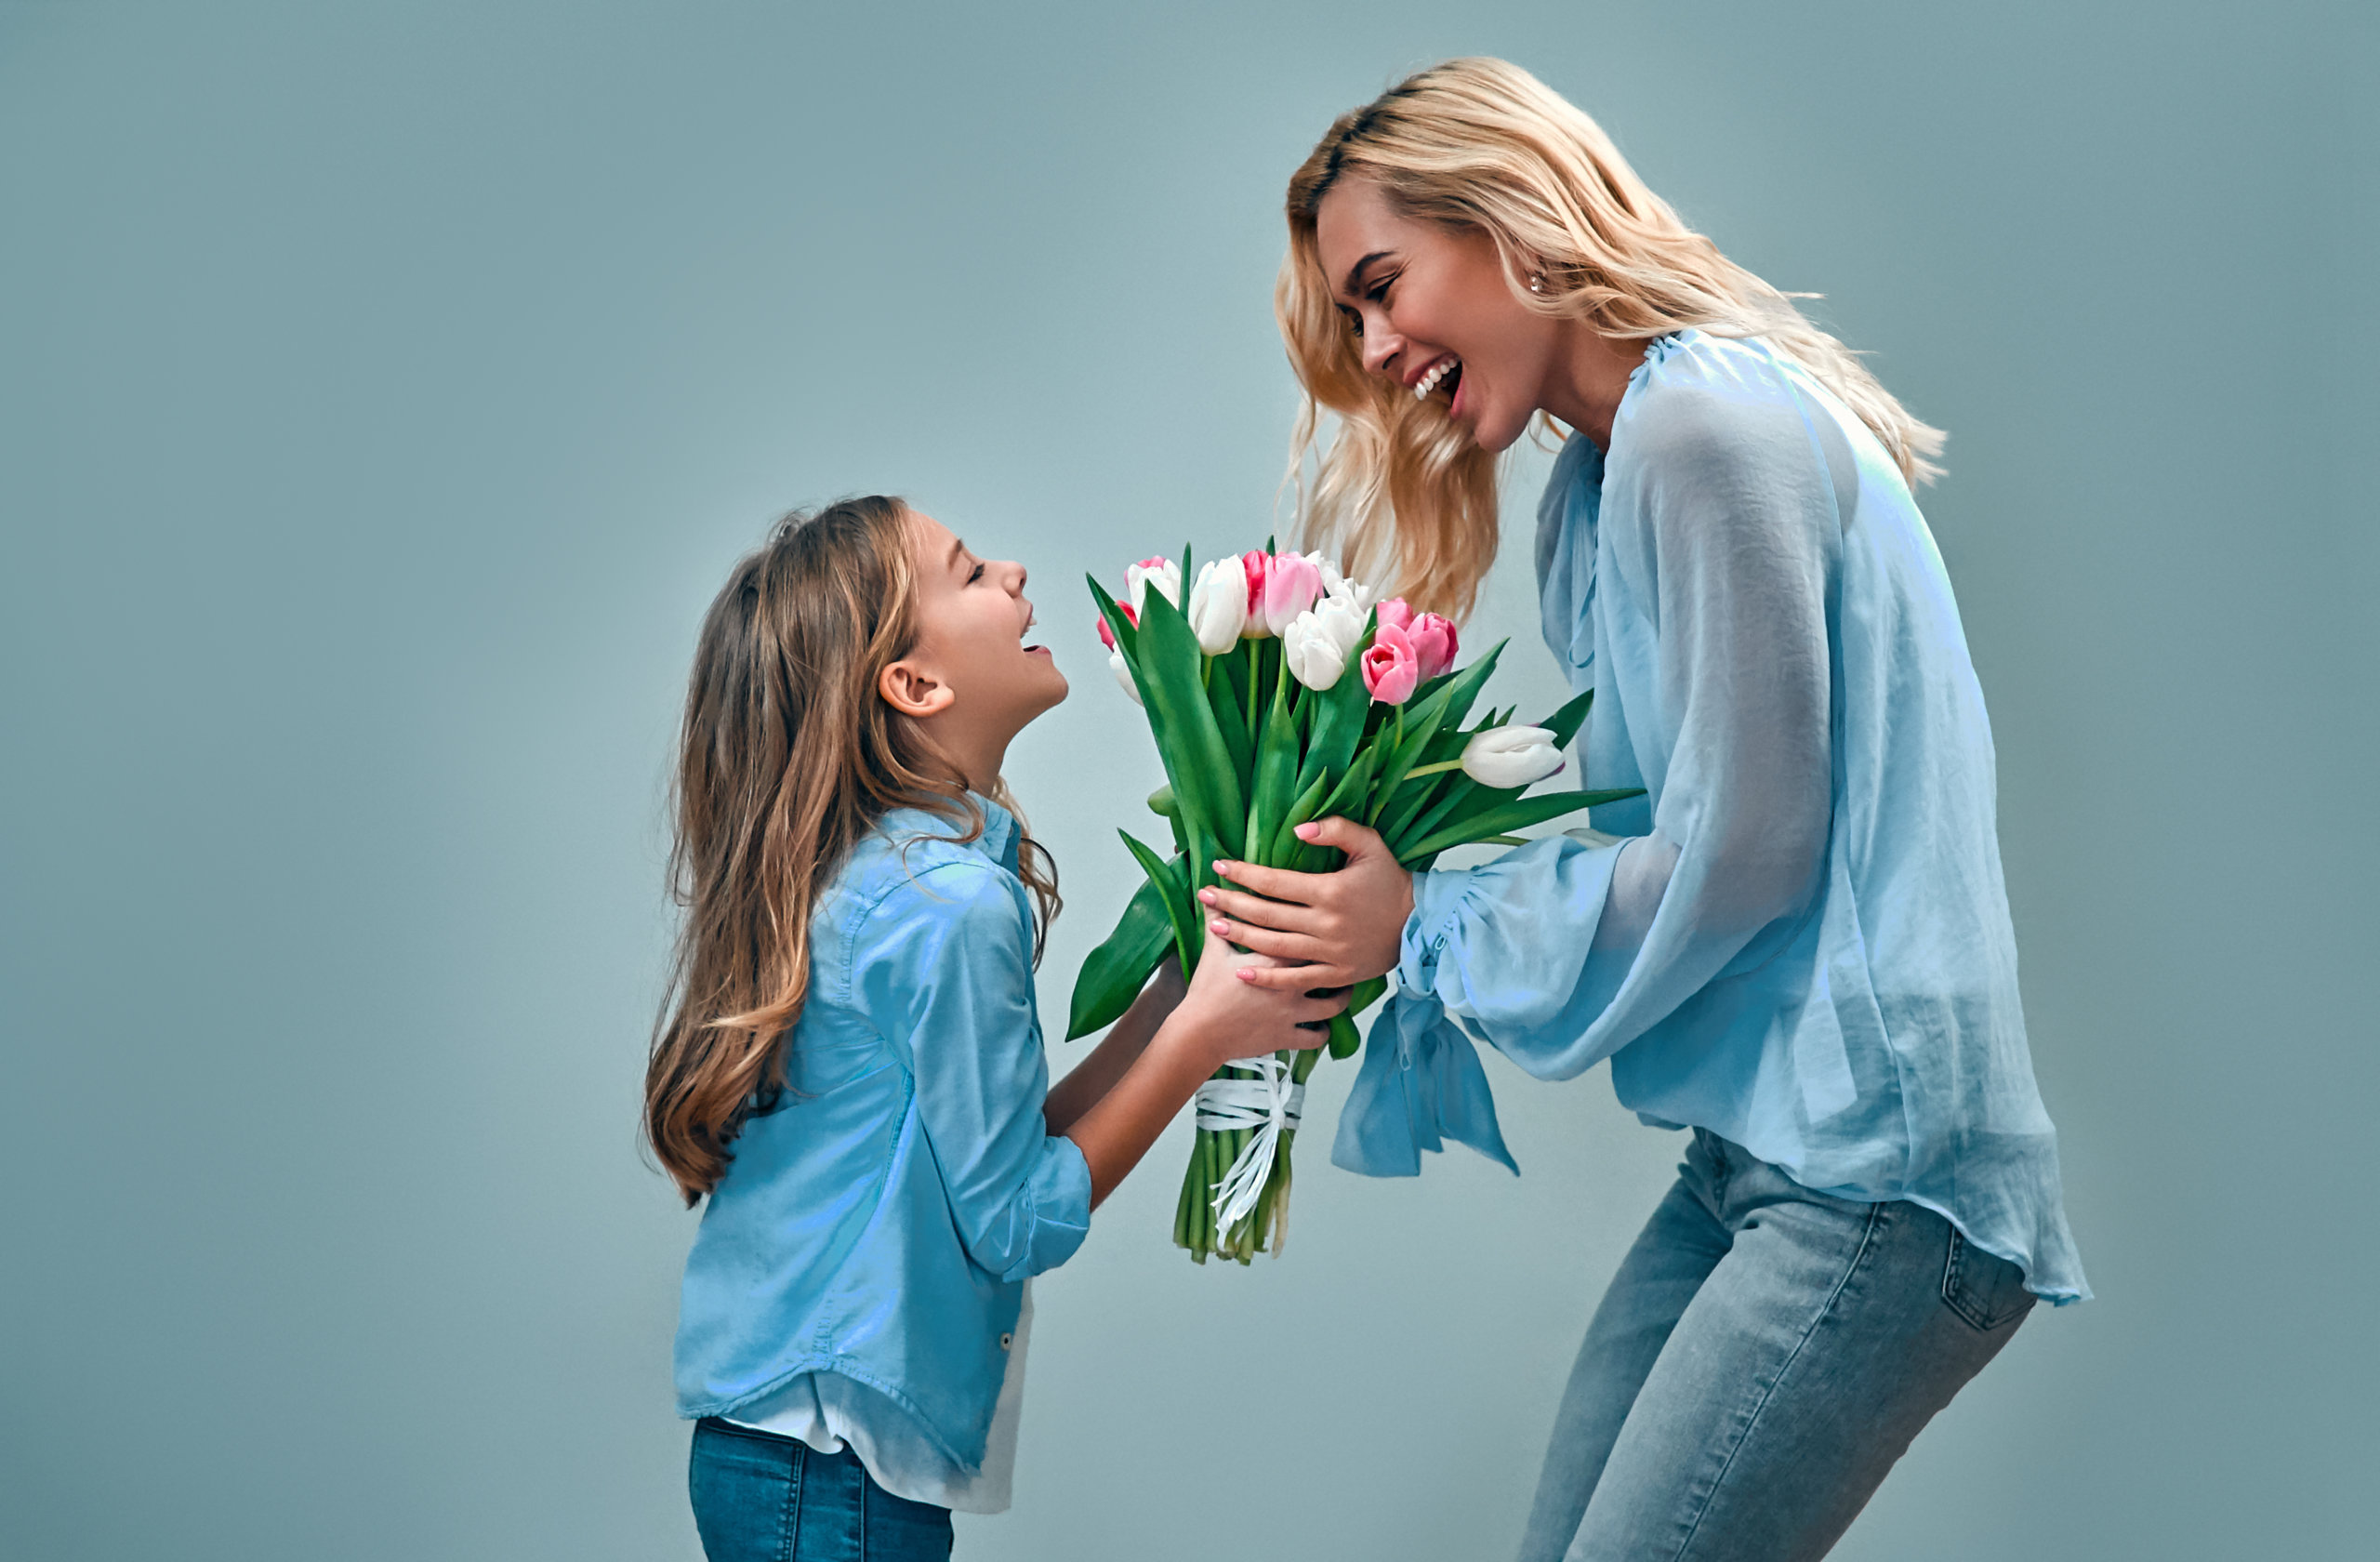 Kids can prepare something extra special for Mom this year.